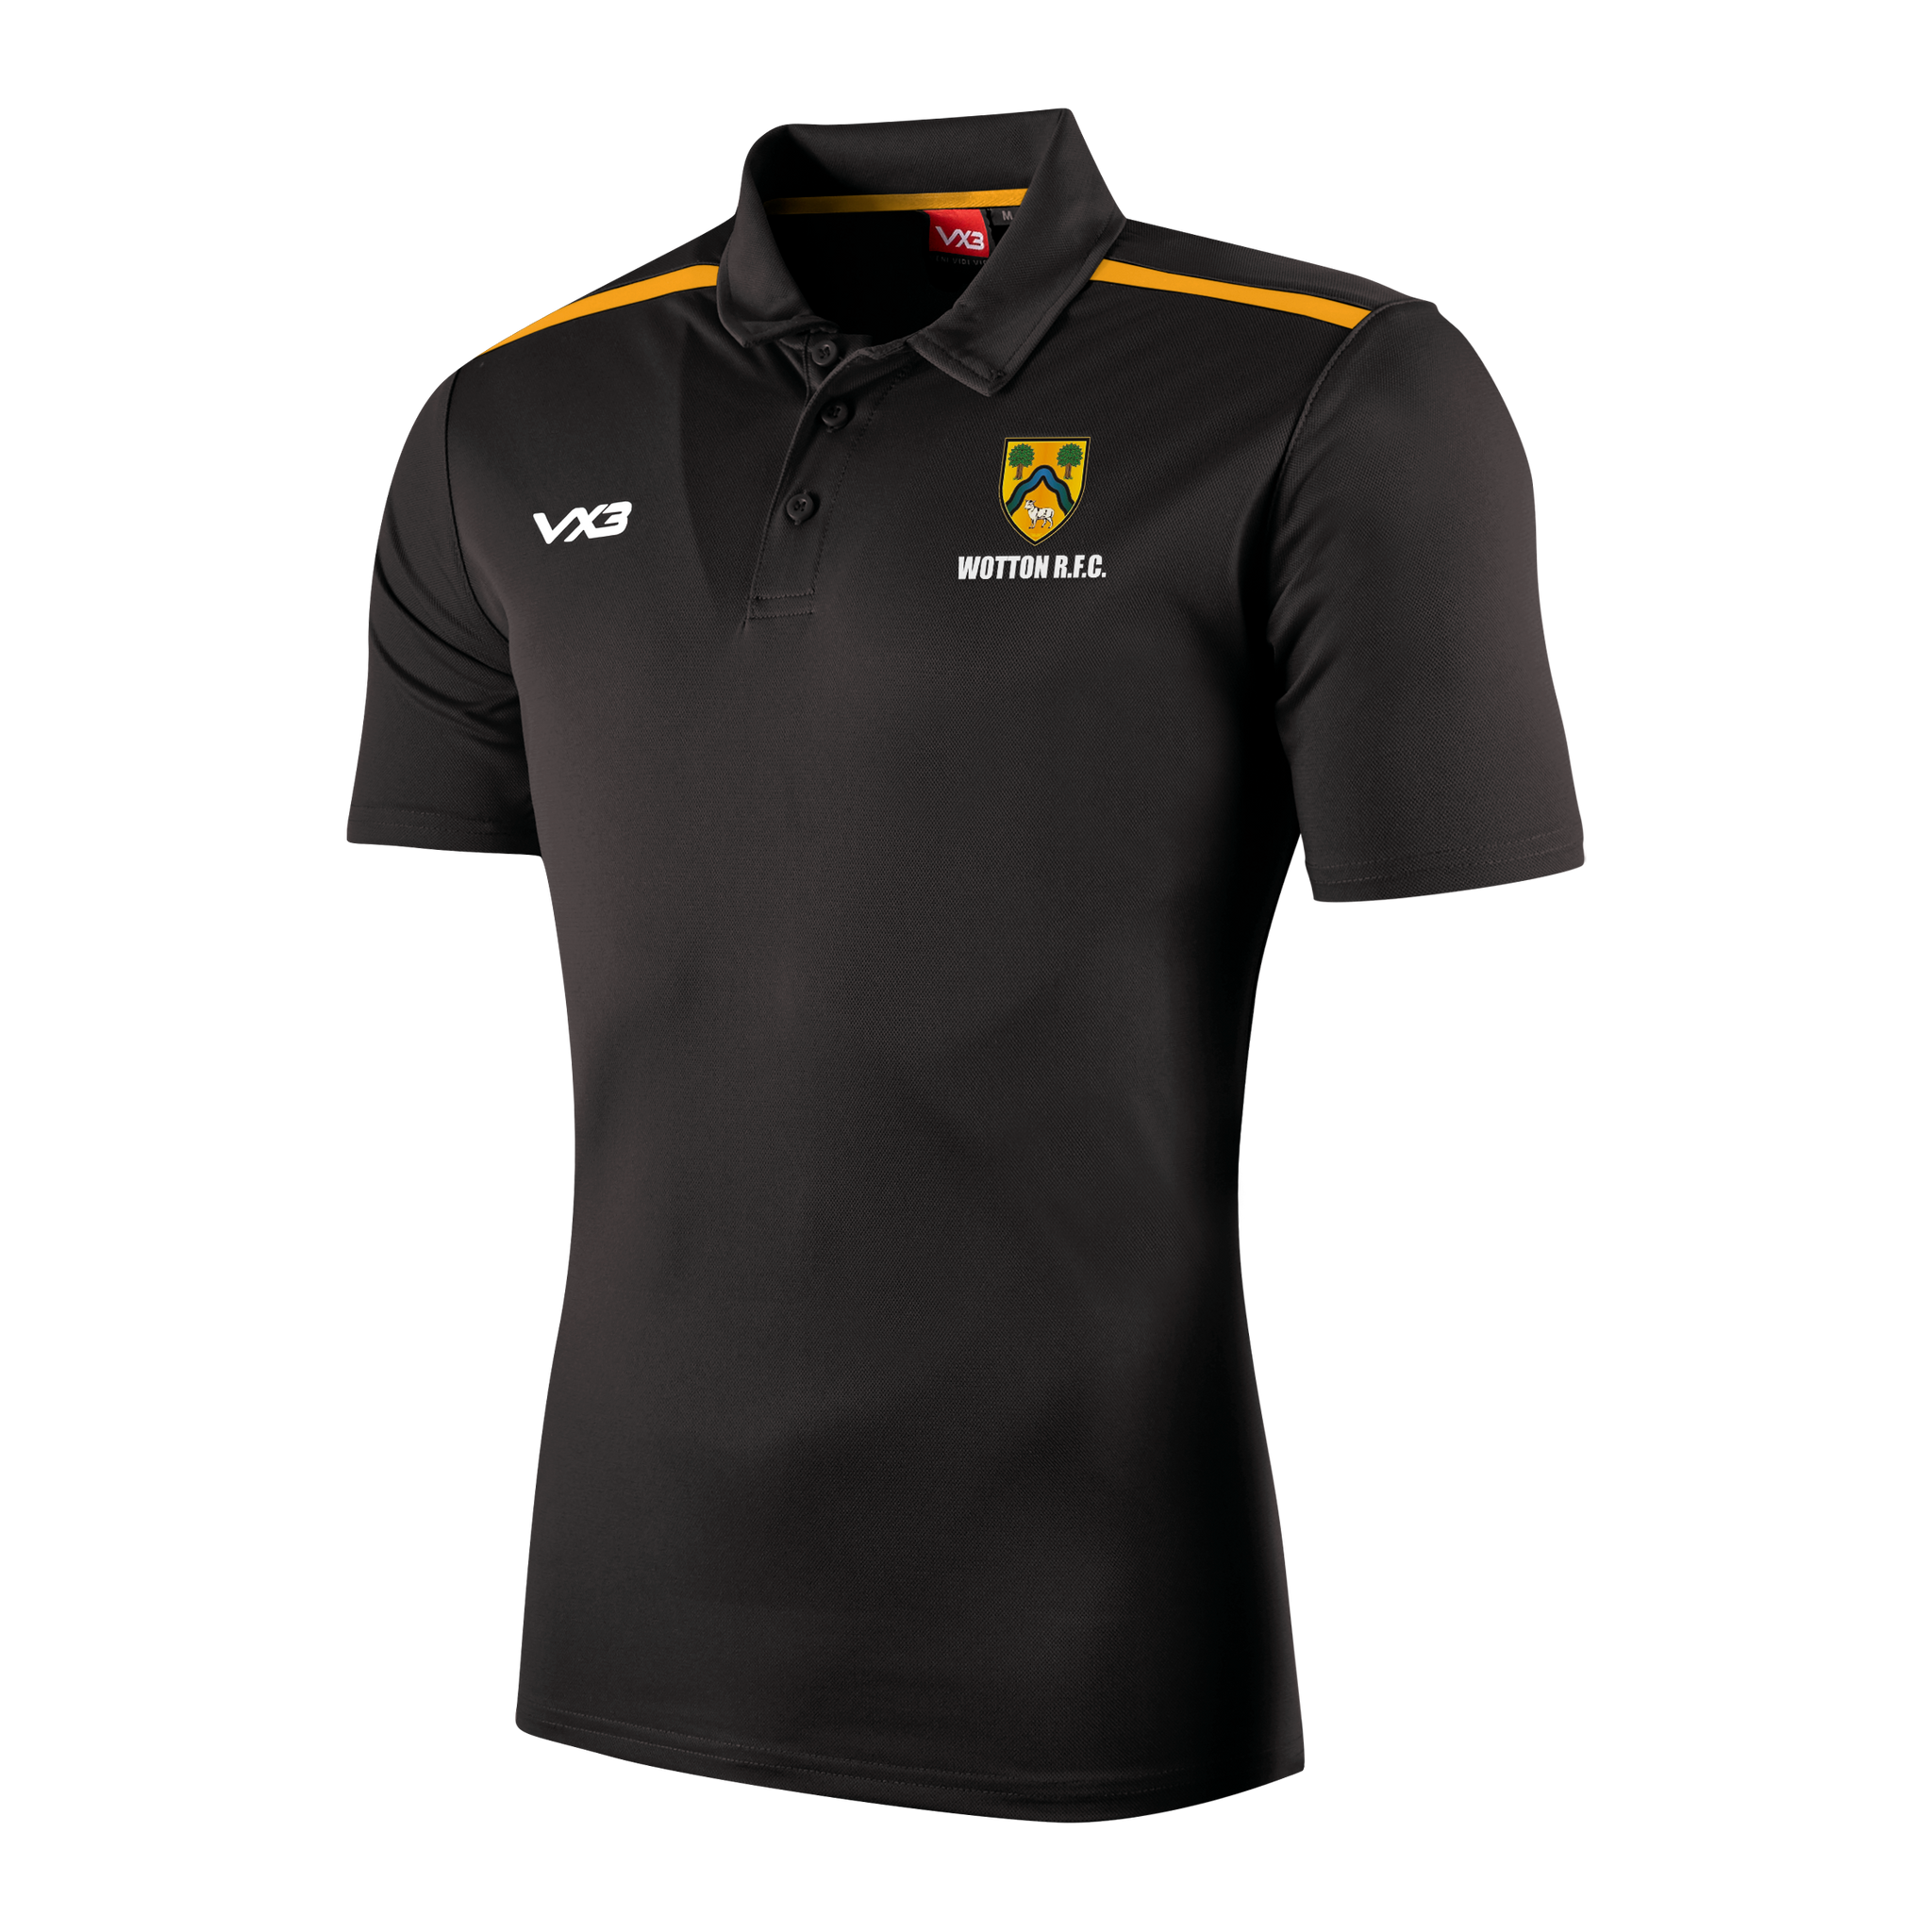 Wotton RFC Fortis Youth Polo